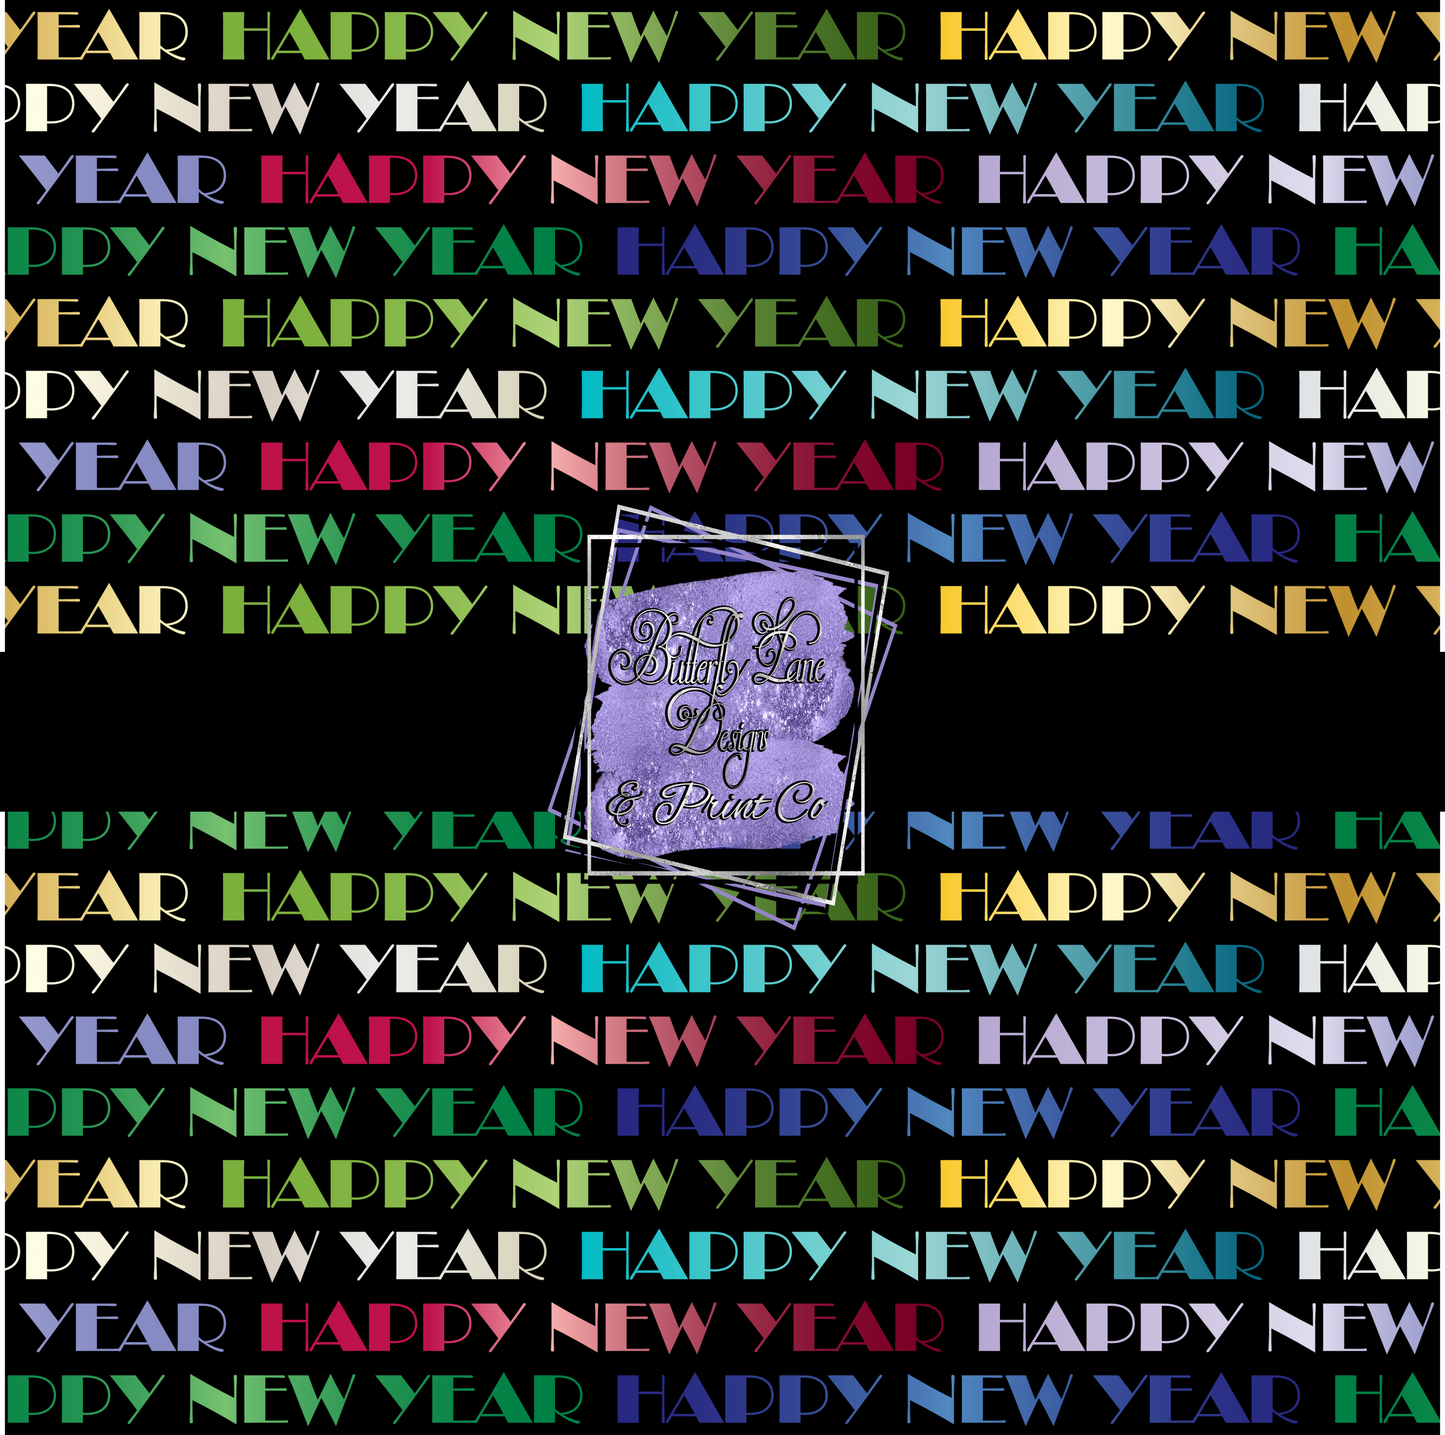 Happy New Year 3- PV 344  Patterned Vinyl